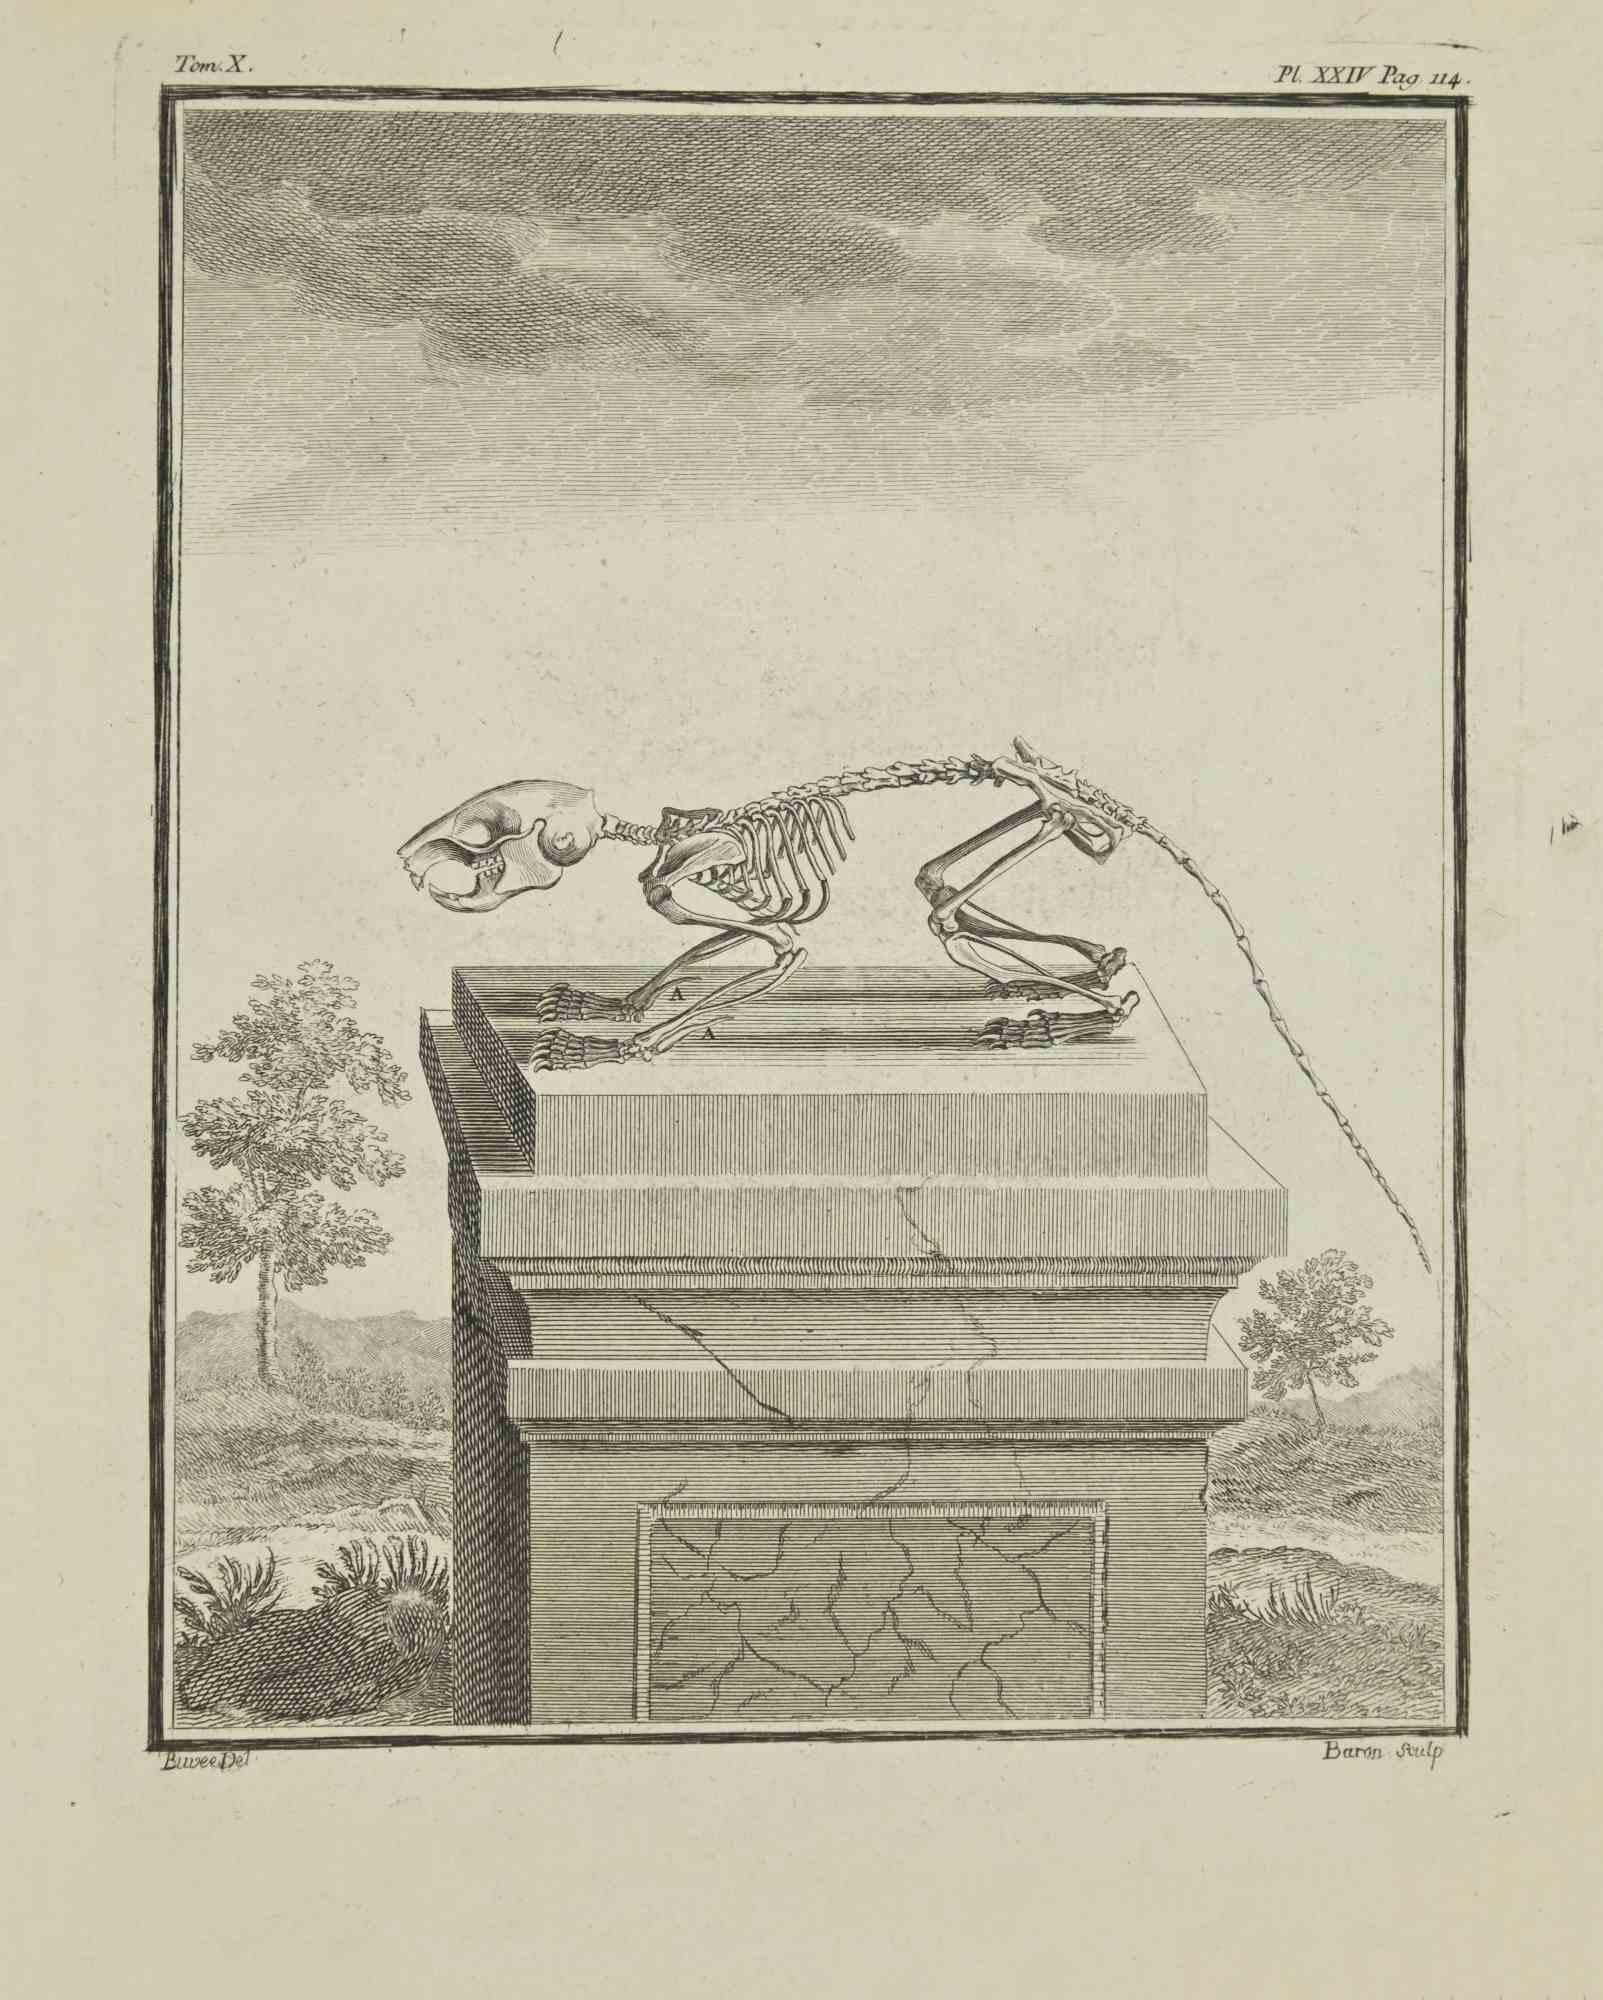 The Skeleton is an etching realized by Jacques Baron in 1771.

It belongs to the suite "Histoire Naturelle de Buffon".

The Artist's signature is engraved lower right.

Good conditions.